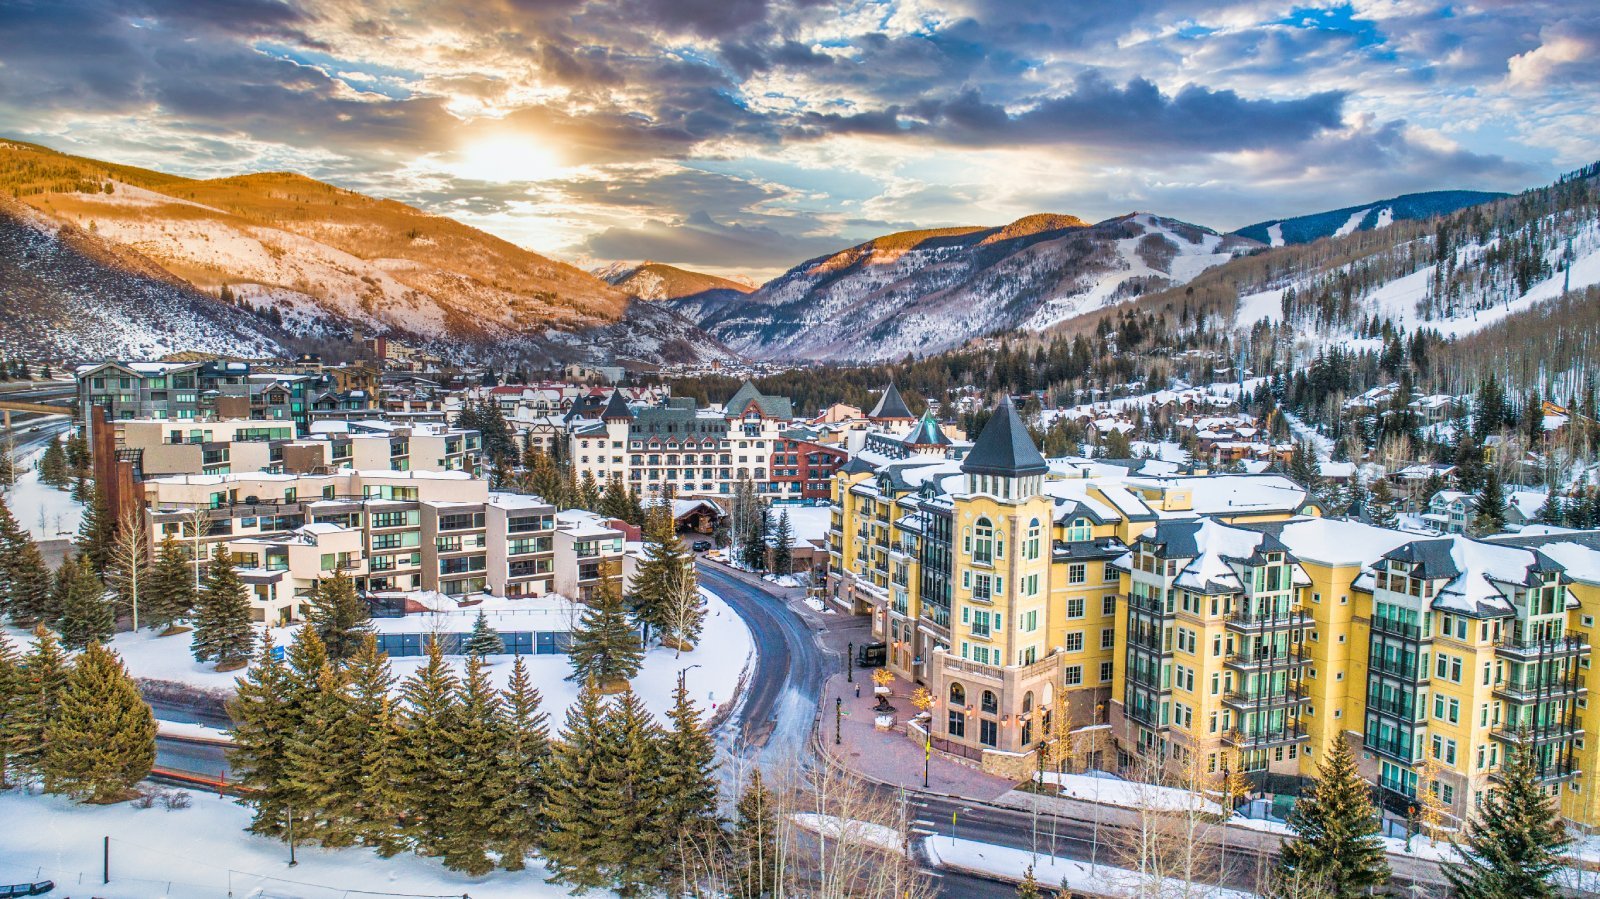 <p class="wp-caption-text">Image Credit: Shutterstock / Kevin Ruck</p>  <p><span>Hit Aspen’s slopes for that sweet spot of spring skiing. Expect lift tickets to run around $150, but the trade-off is premium slopes with fewer crowds and sunnier skies.</span></p>